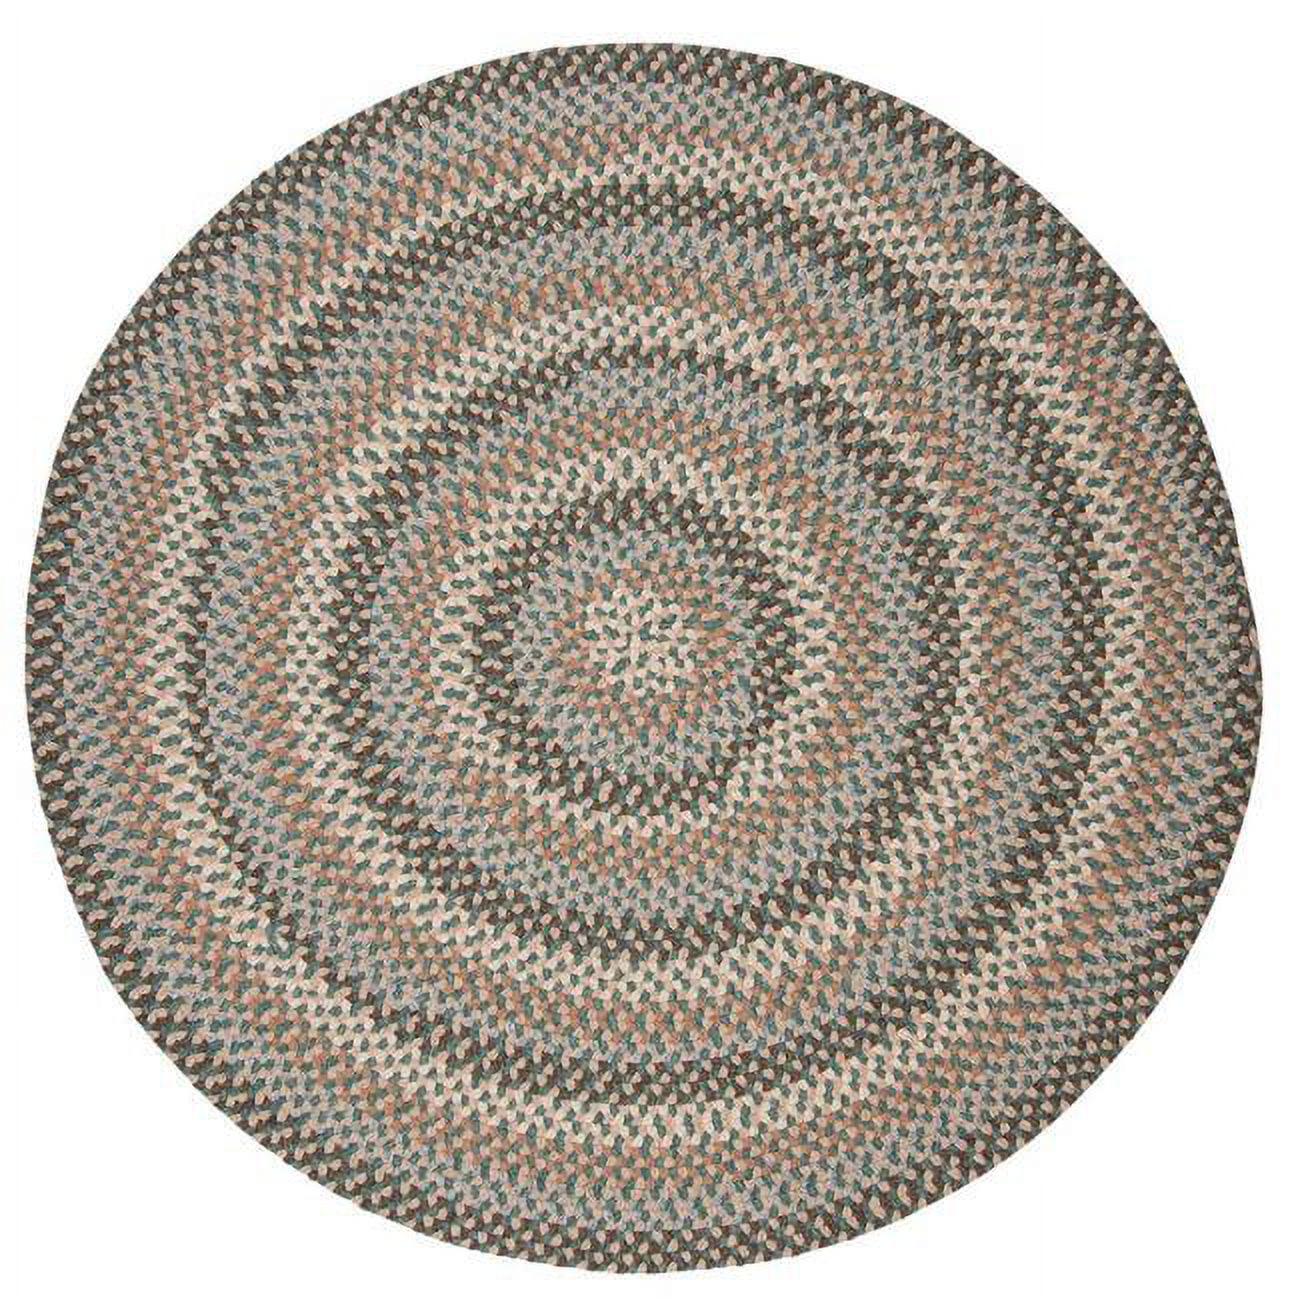 Bc54r060x060 5 Ft. Boston Common Round Rug, Driftwood Teal